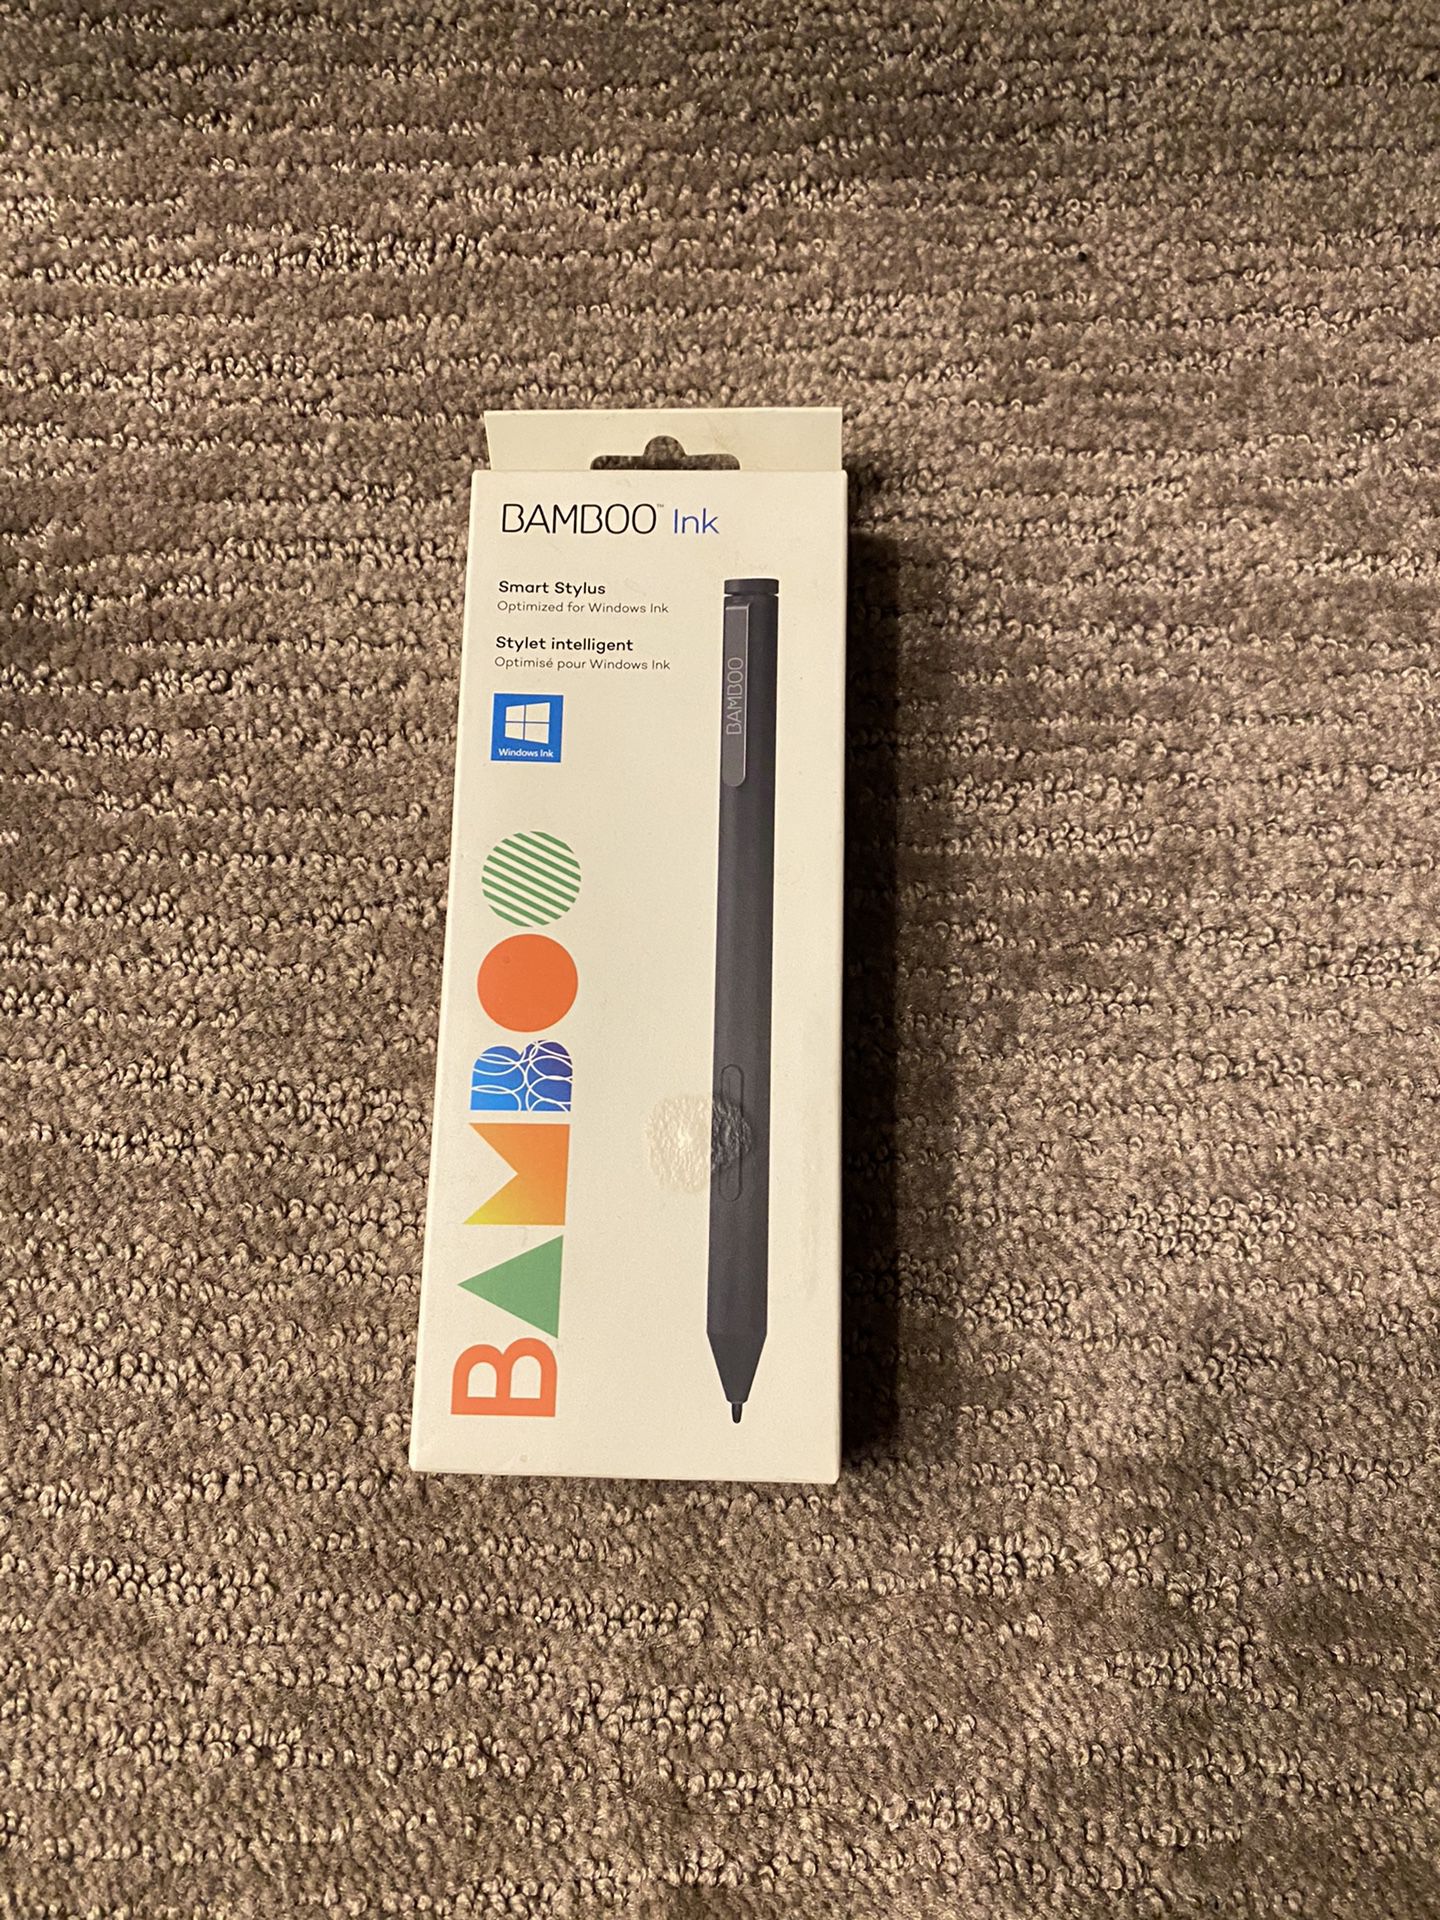 New In Box Bamboo Ink Smart Stylus!